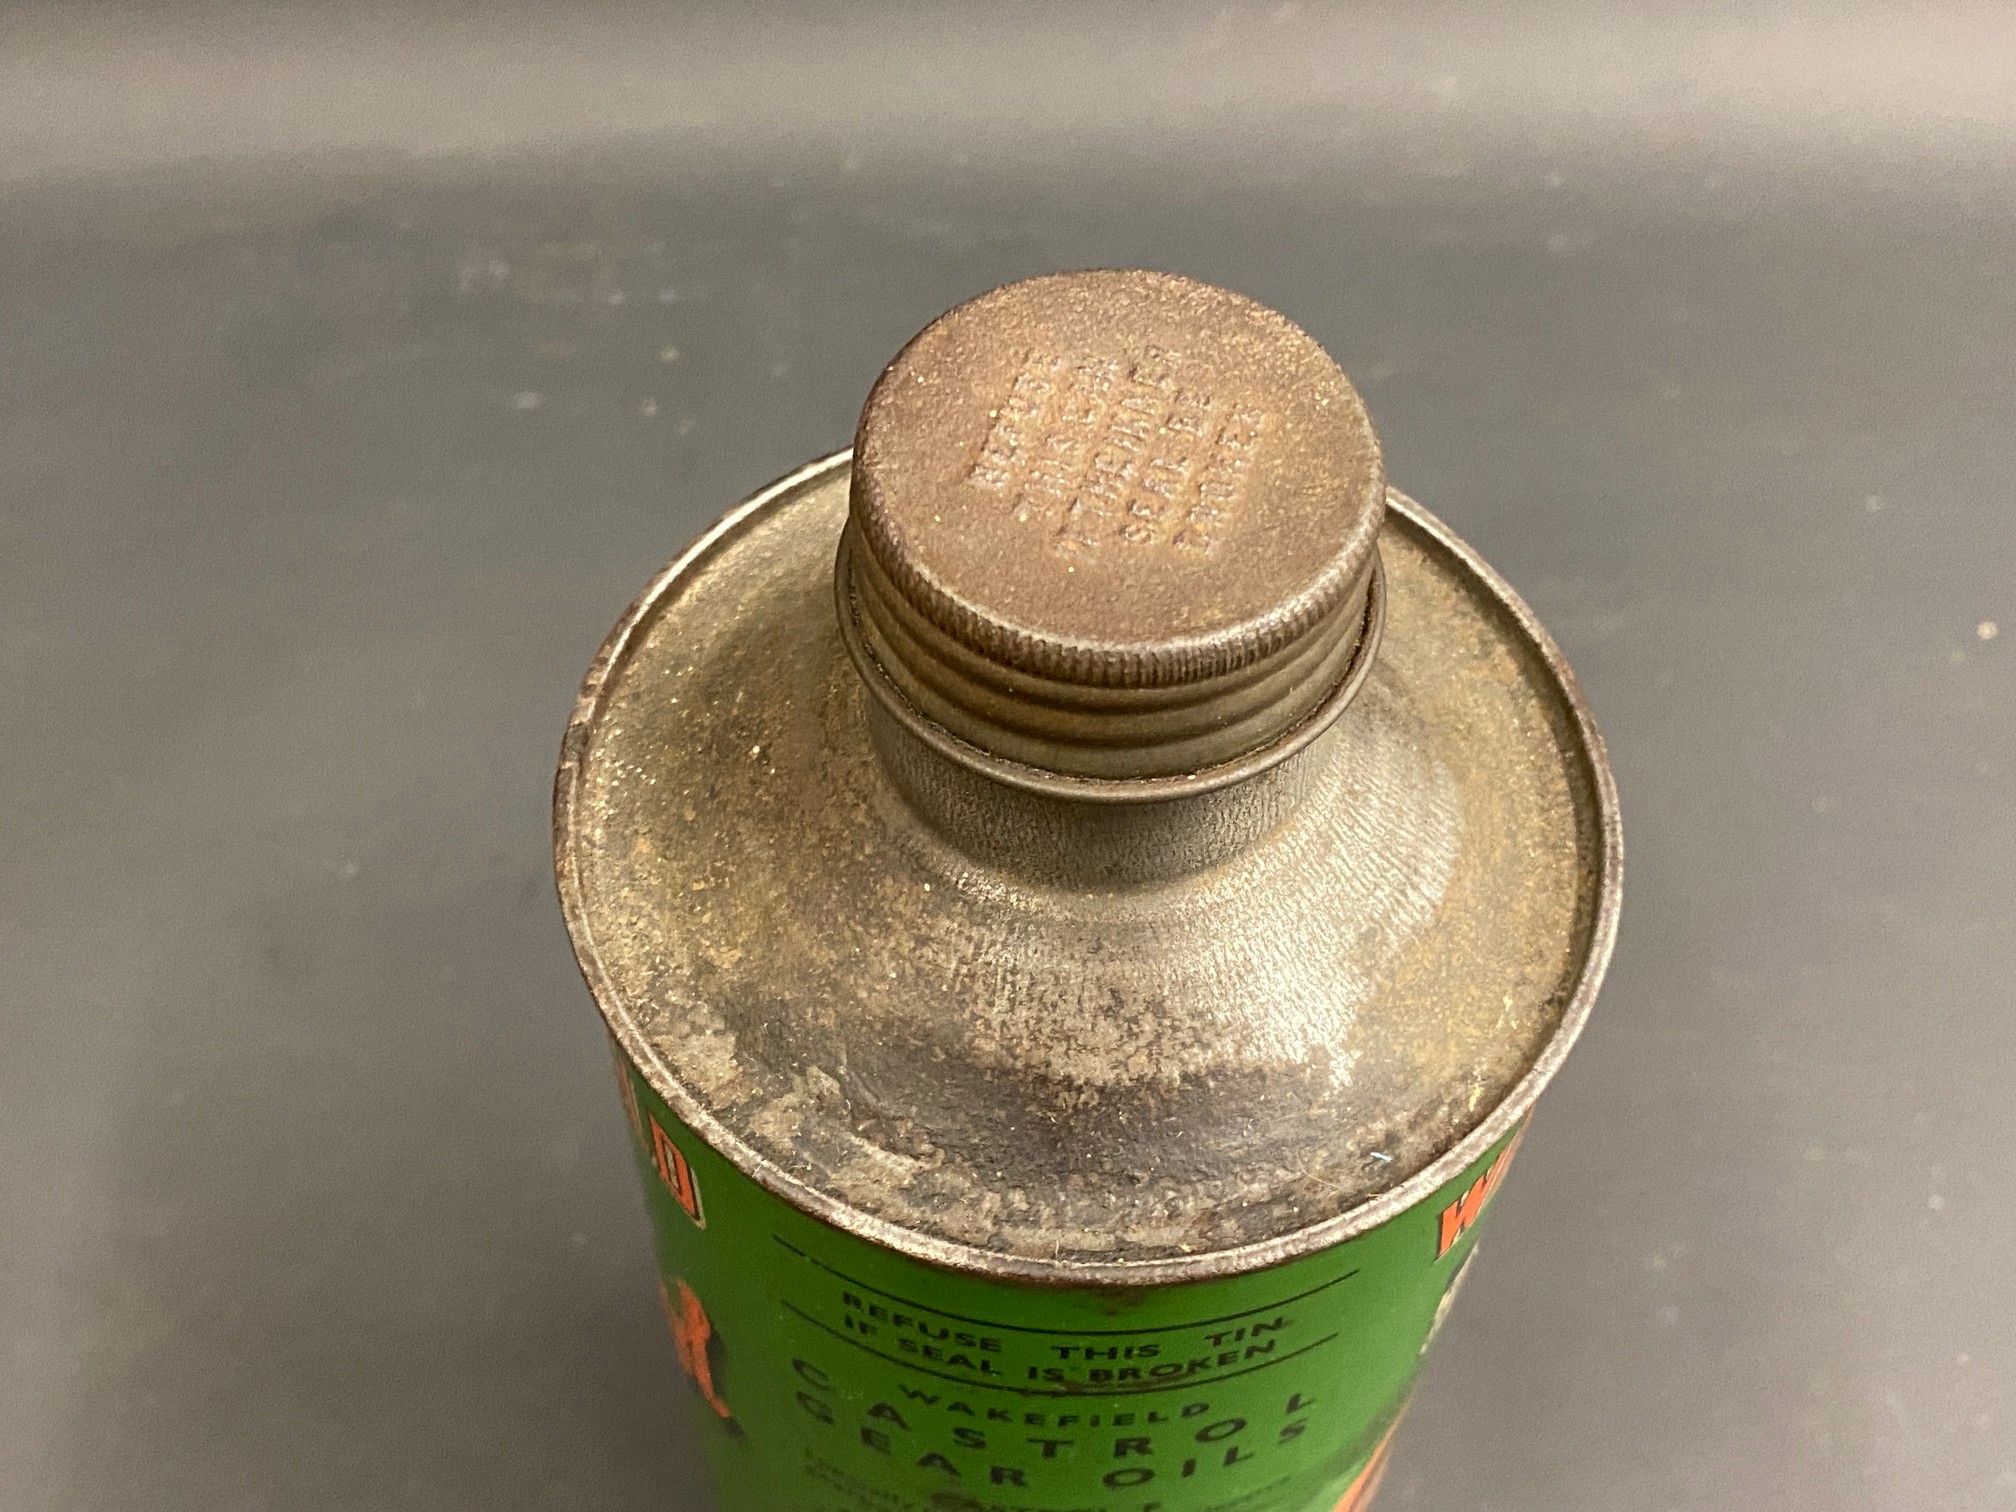 A Wakefield Castrol Gear Oil 'F' grade cylindrical quart can with image of a gearbox internals, - Image 5 of 7